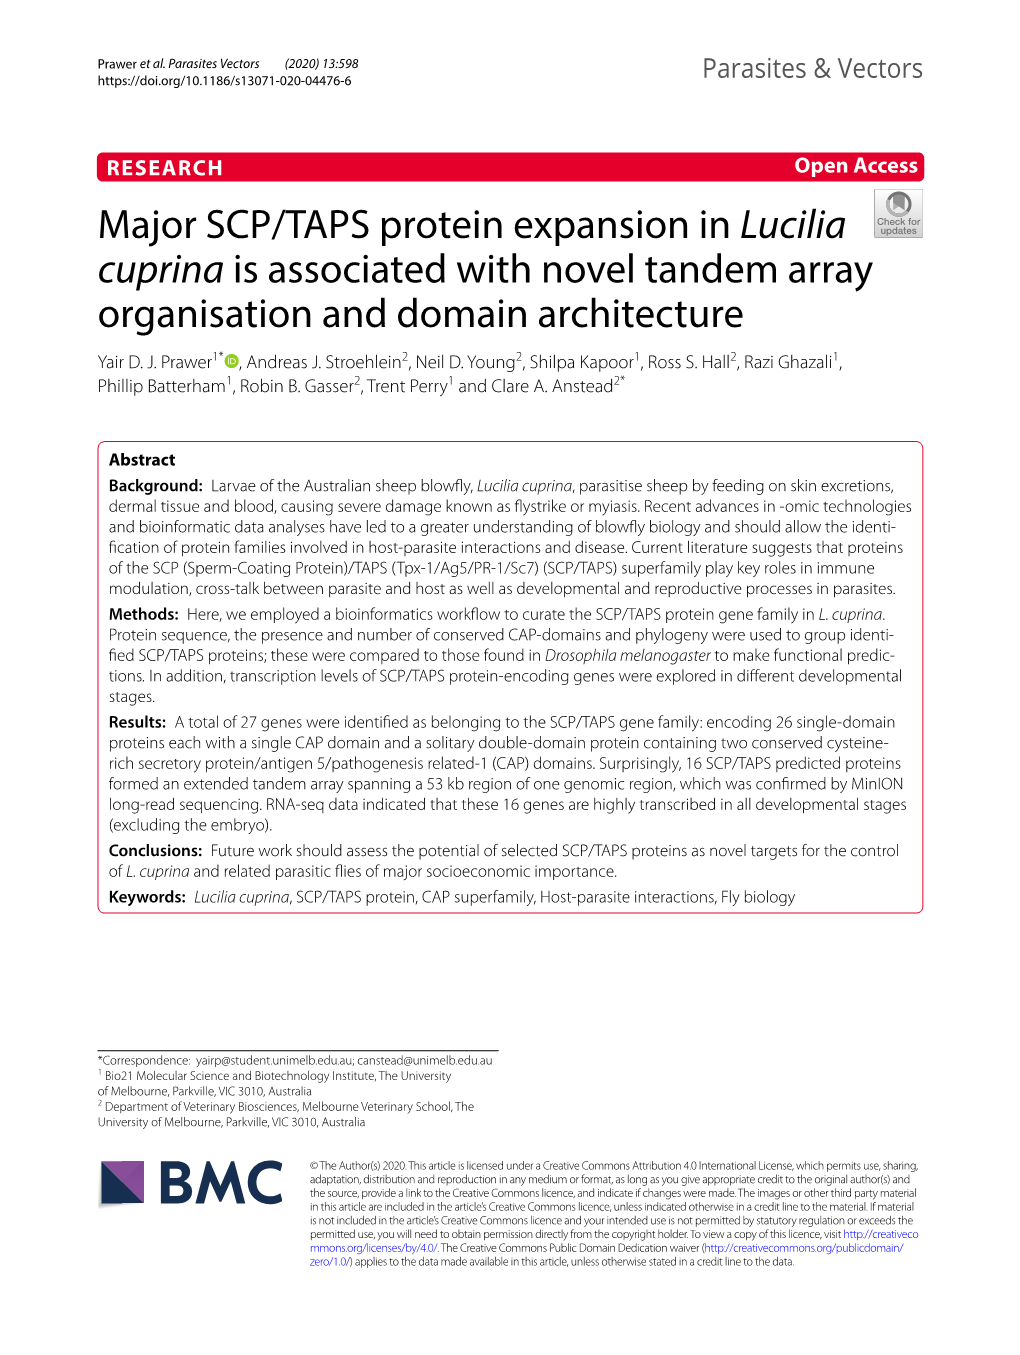 Major SCP/TAPS Protein Expansion in Lucilia Cuprina Is Associated with Novel Tandem Array Organisation and Domain Architecture Yair D